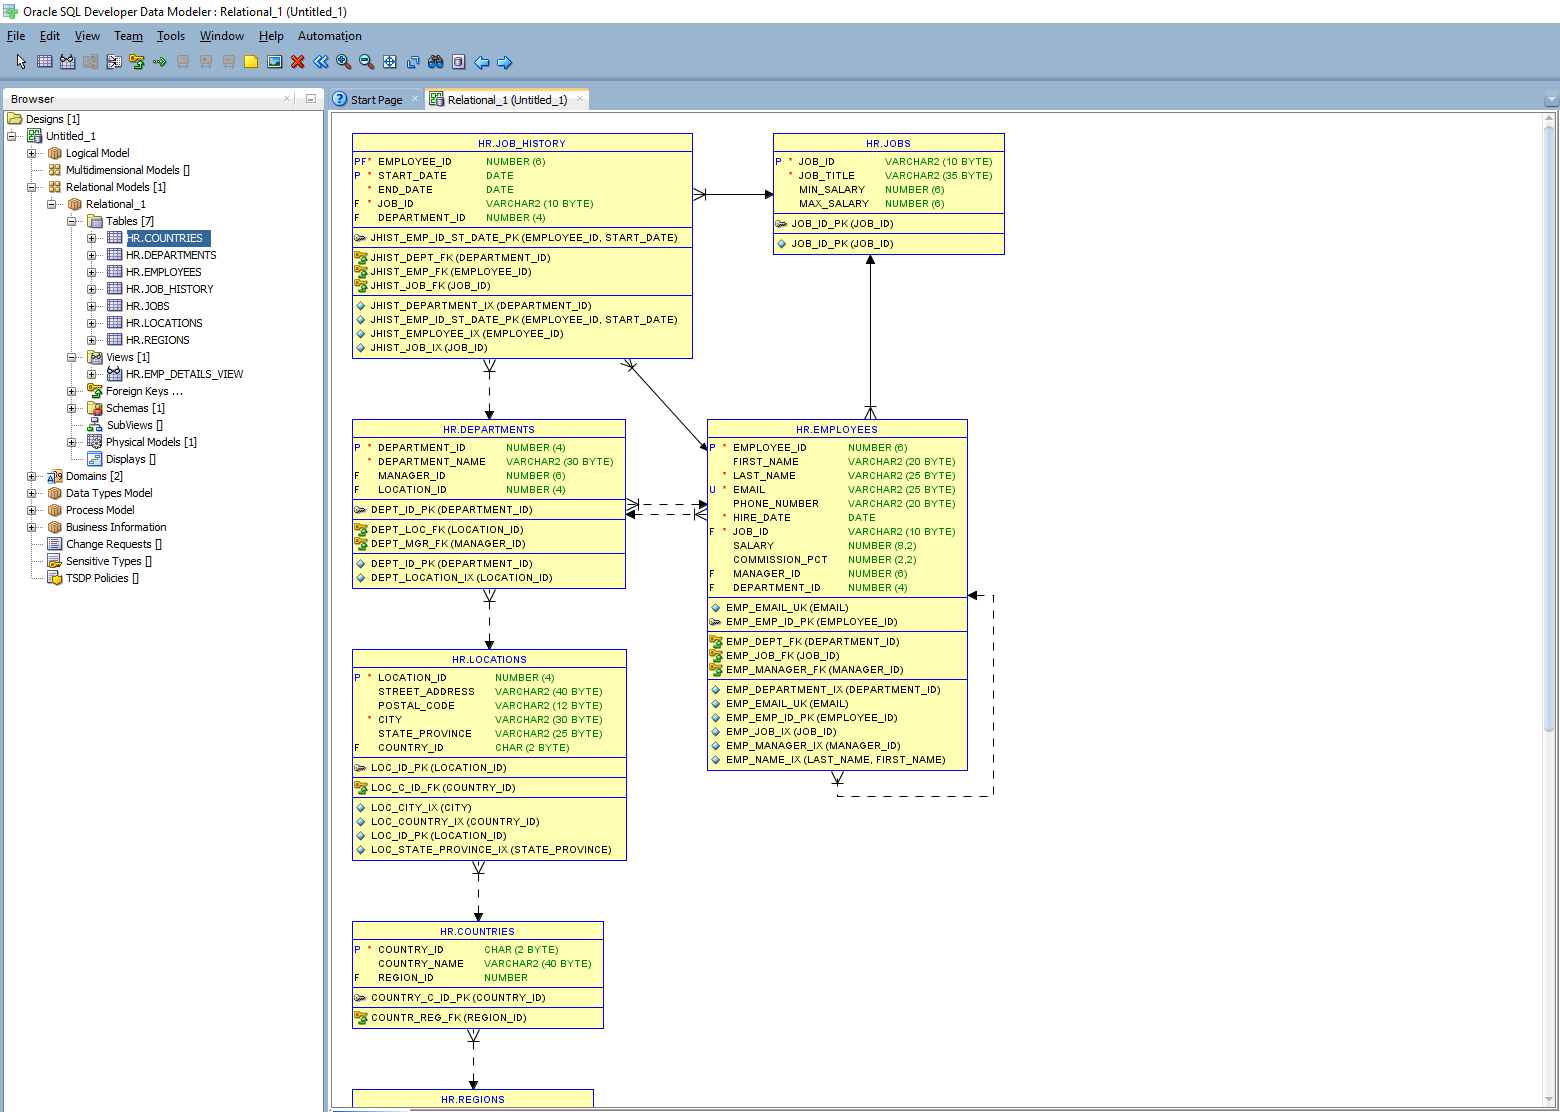 How To Create Er Diagram For Existing Database With Oracle within Er Diagram Sql Developer